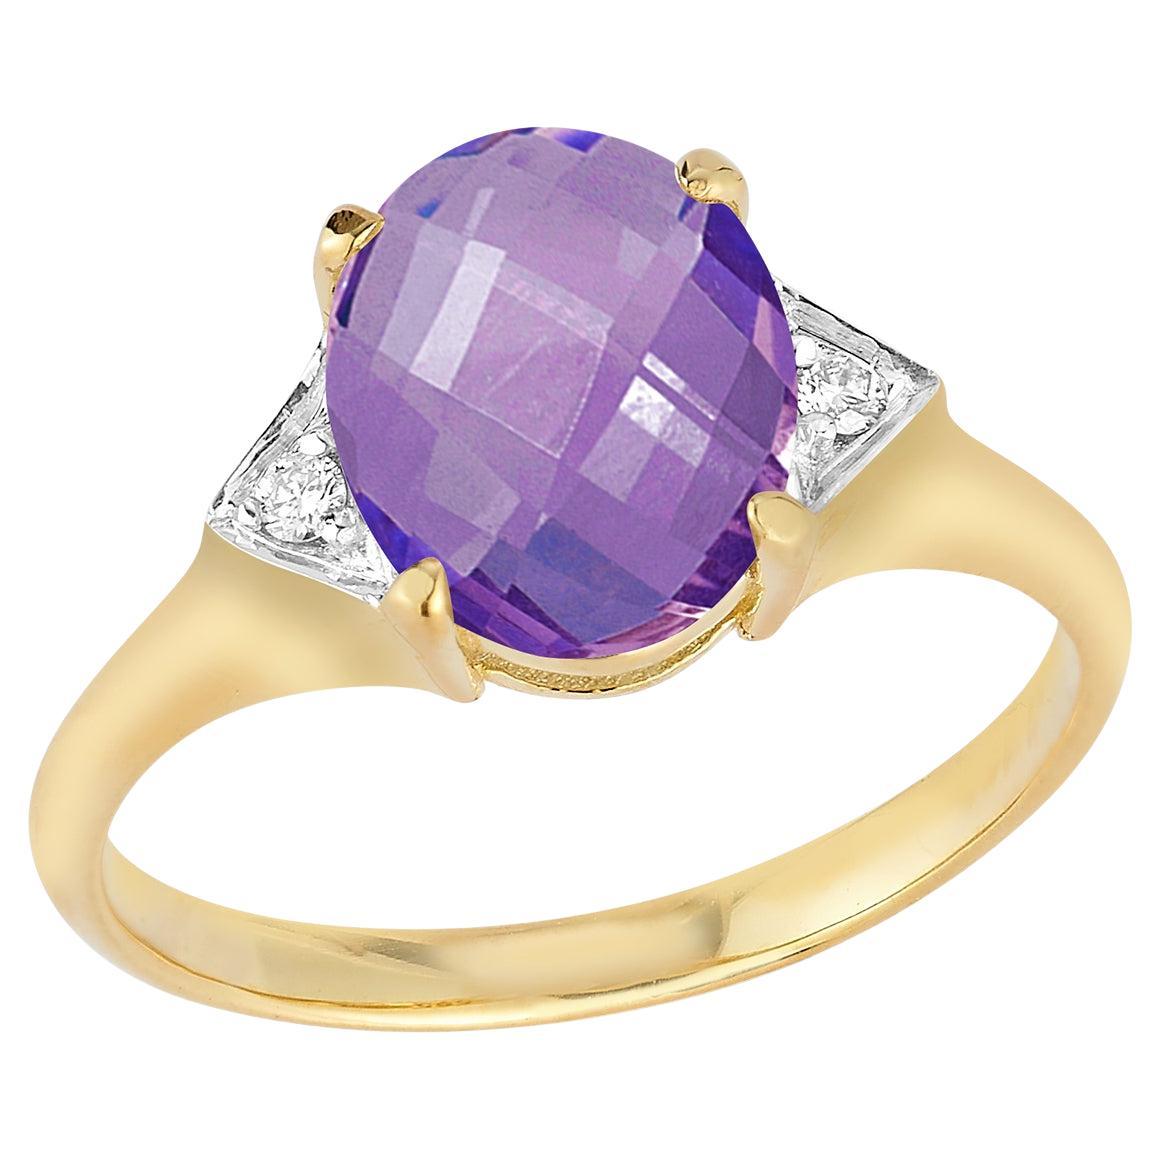 Hand-Crafted 14K Gold 0.05 ct. tw. Diamond & 5.35CT Amethyst Cocktail Ring